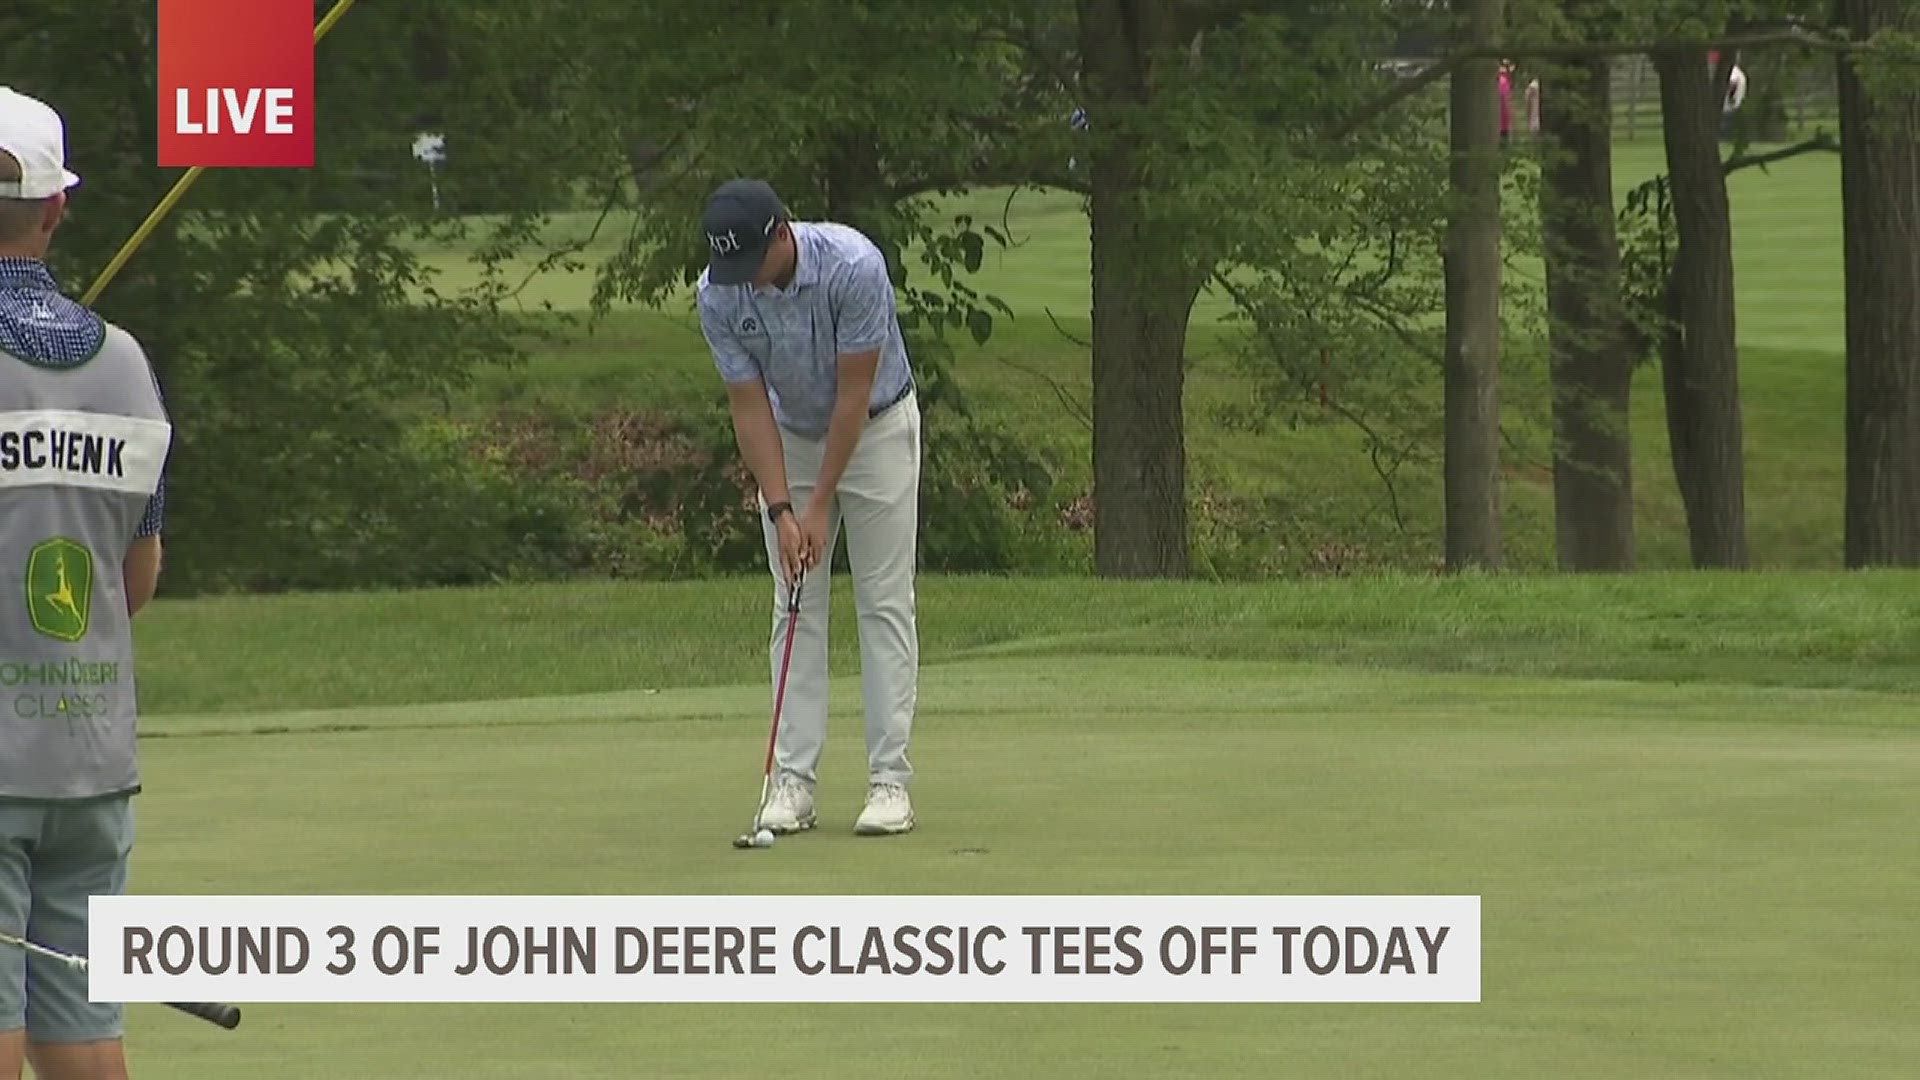 The first tee time is at 9:55! Here's what you may have missed on Friday.